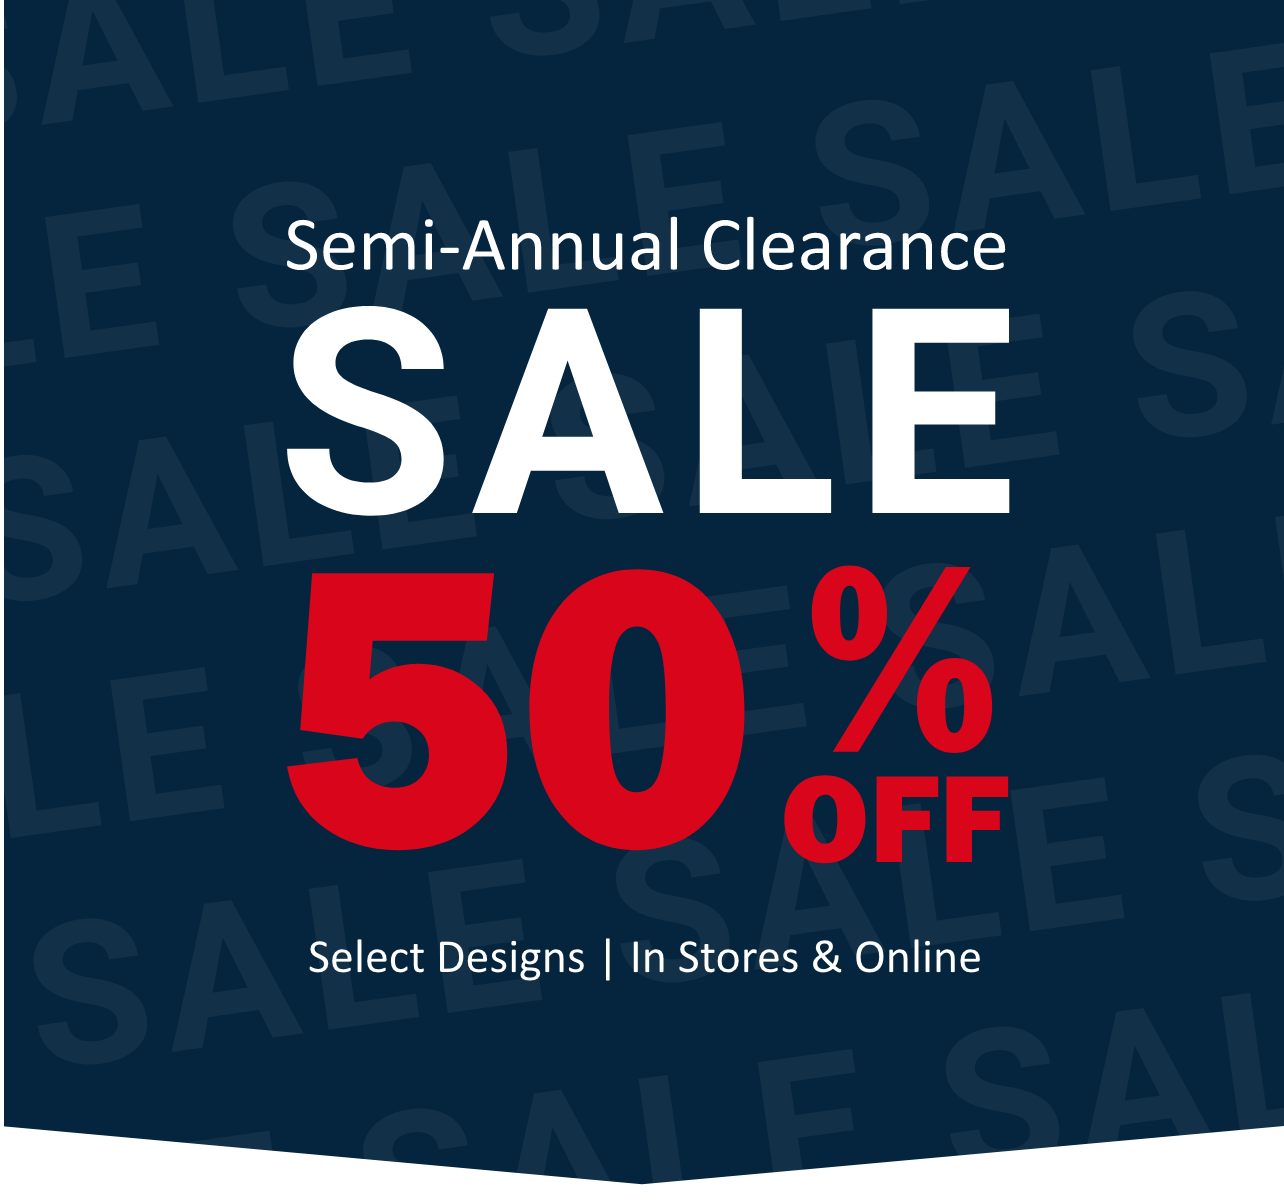 Semi-annual clearance sale. Fifty percent off select designs in stores and online.